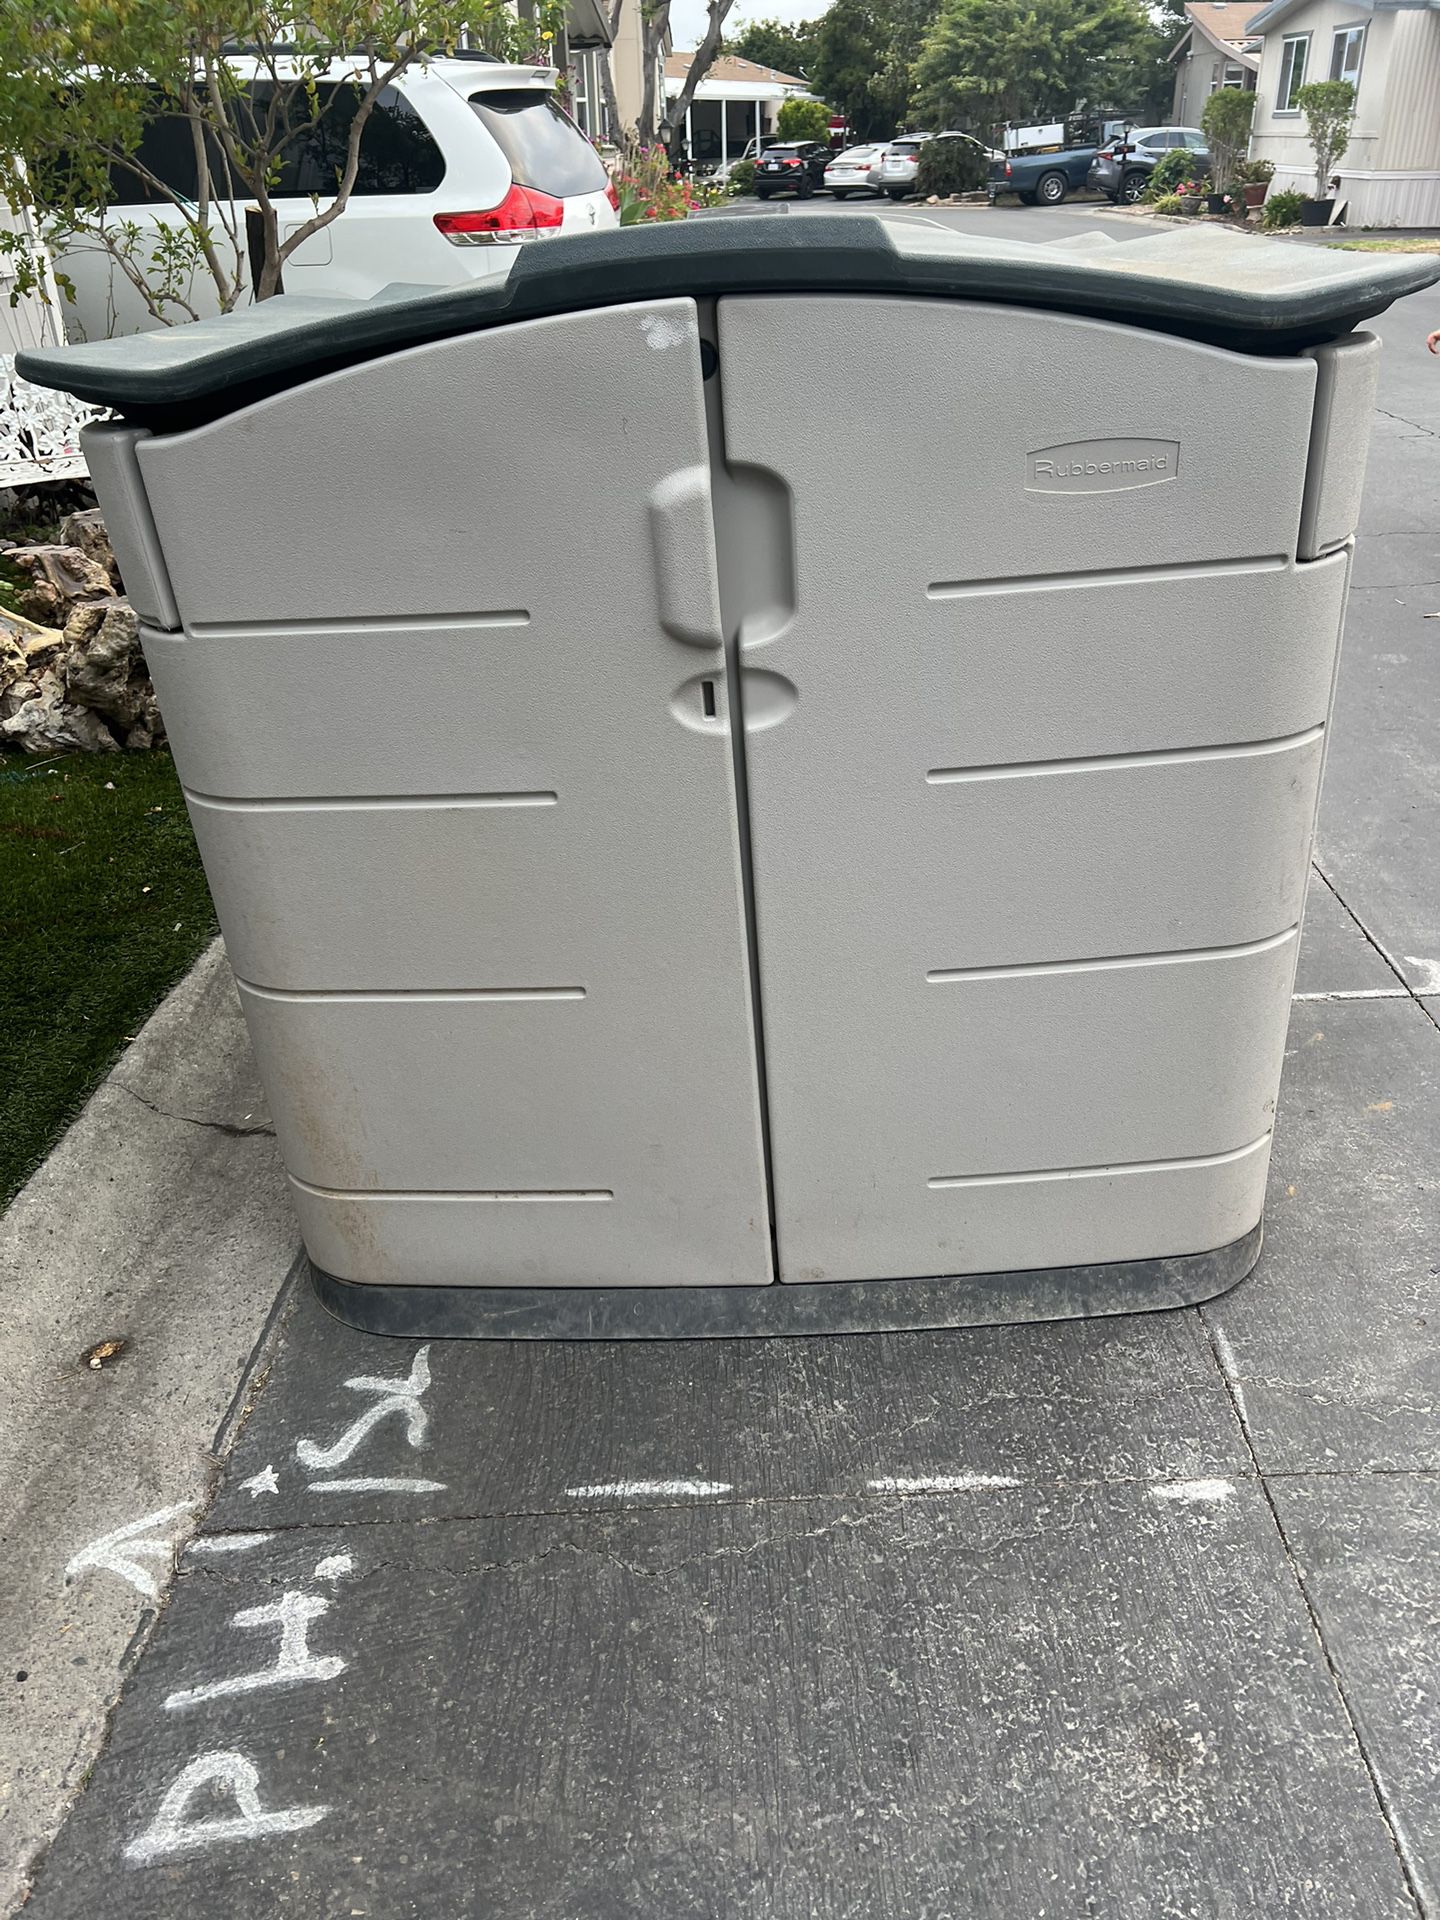 Rubbermaid Outdoor Storage Cabinet for Sale in Escondido, CA - OfferUp